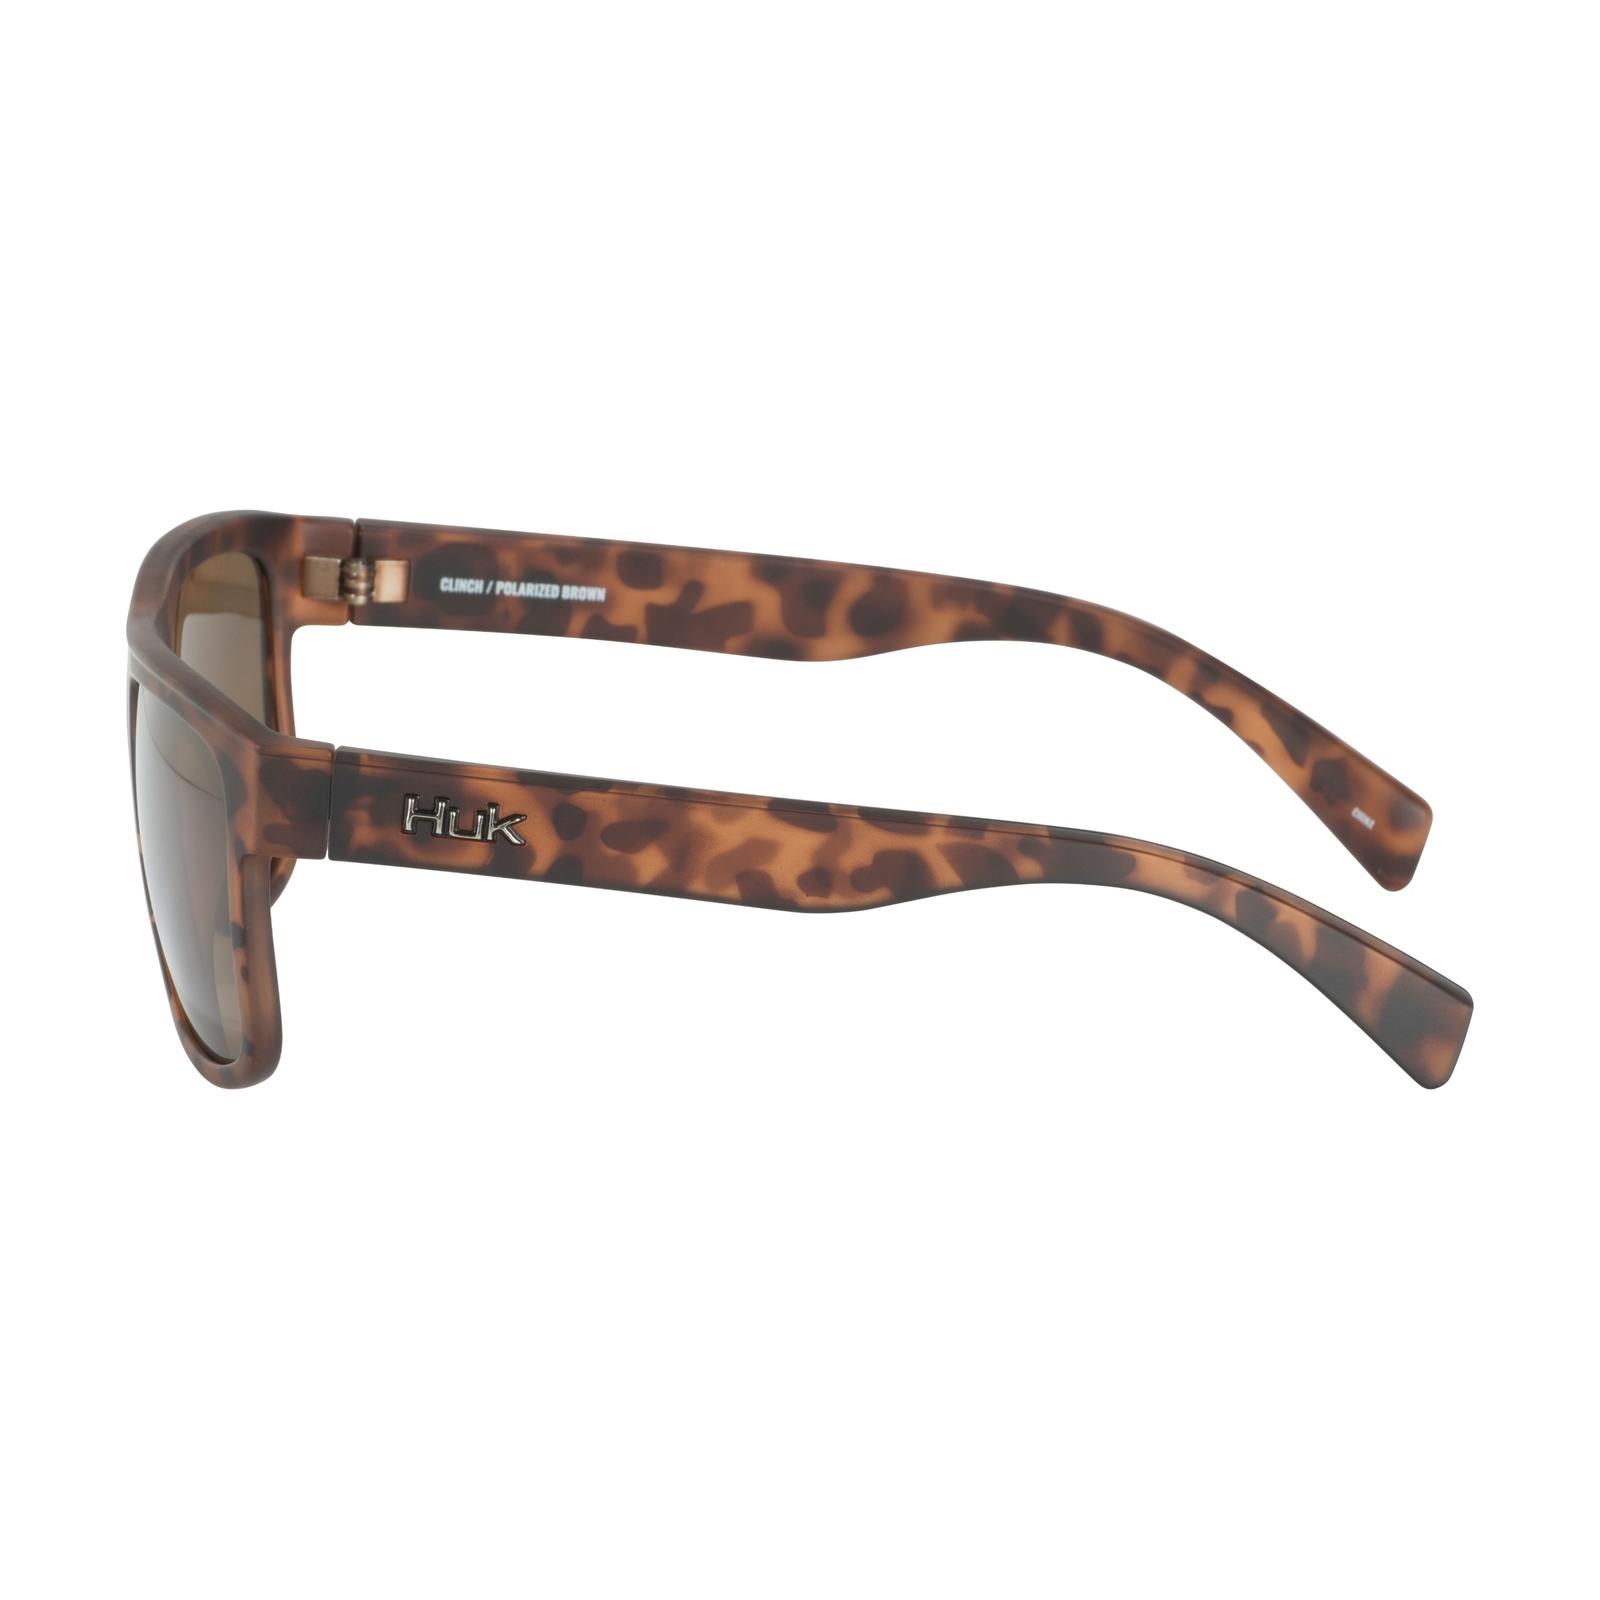 Huk Clinch Brown Tort/Brown Lens 125 SIDE VIEW